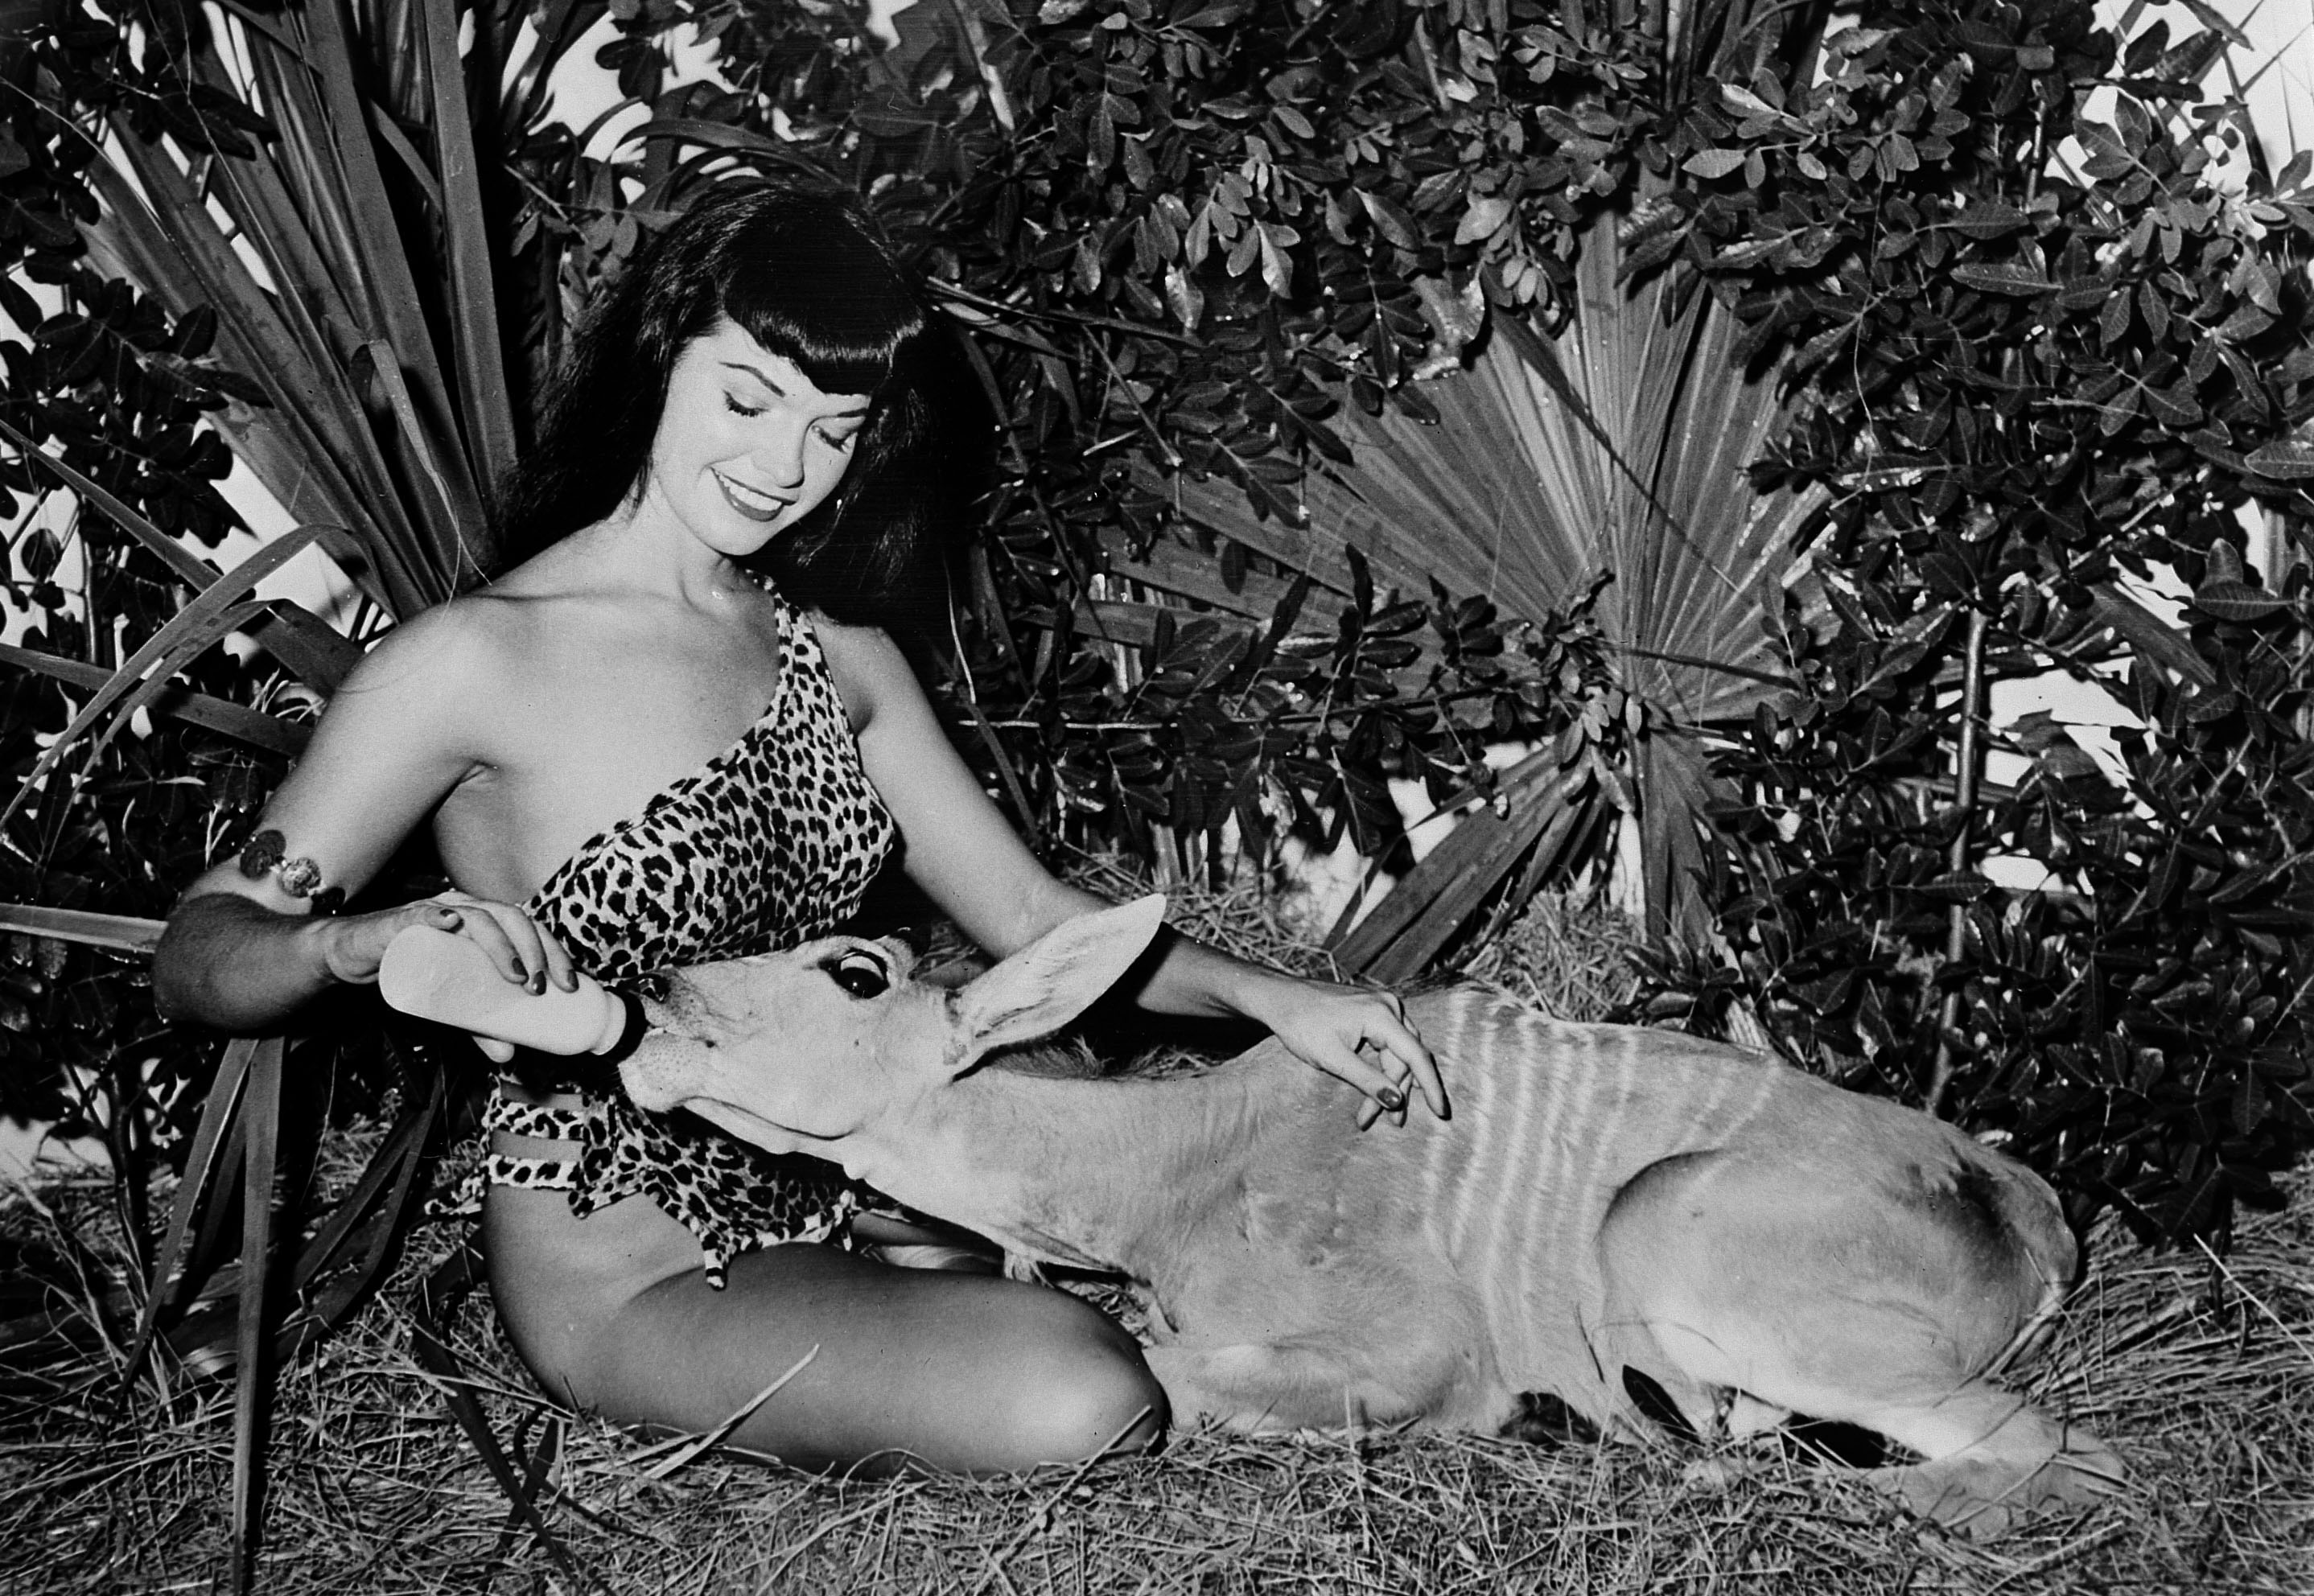 American pin-up model Bettie Page feeds a young Eland calf while on a modeling assignment at Africa USA, a wildlife park in Boca Raton, Fl. (Bunny Yeager—Popperfoto/Getty Images)